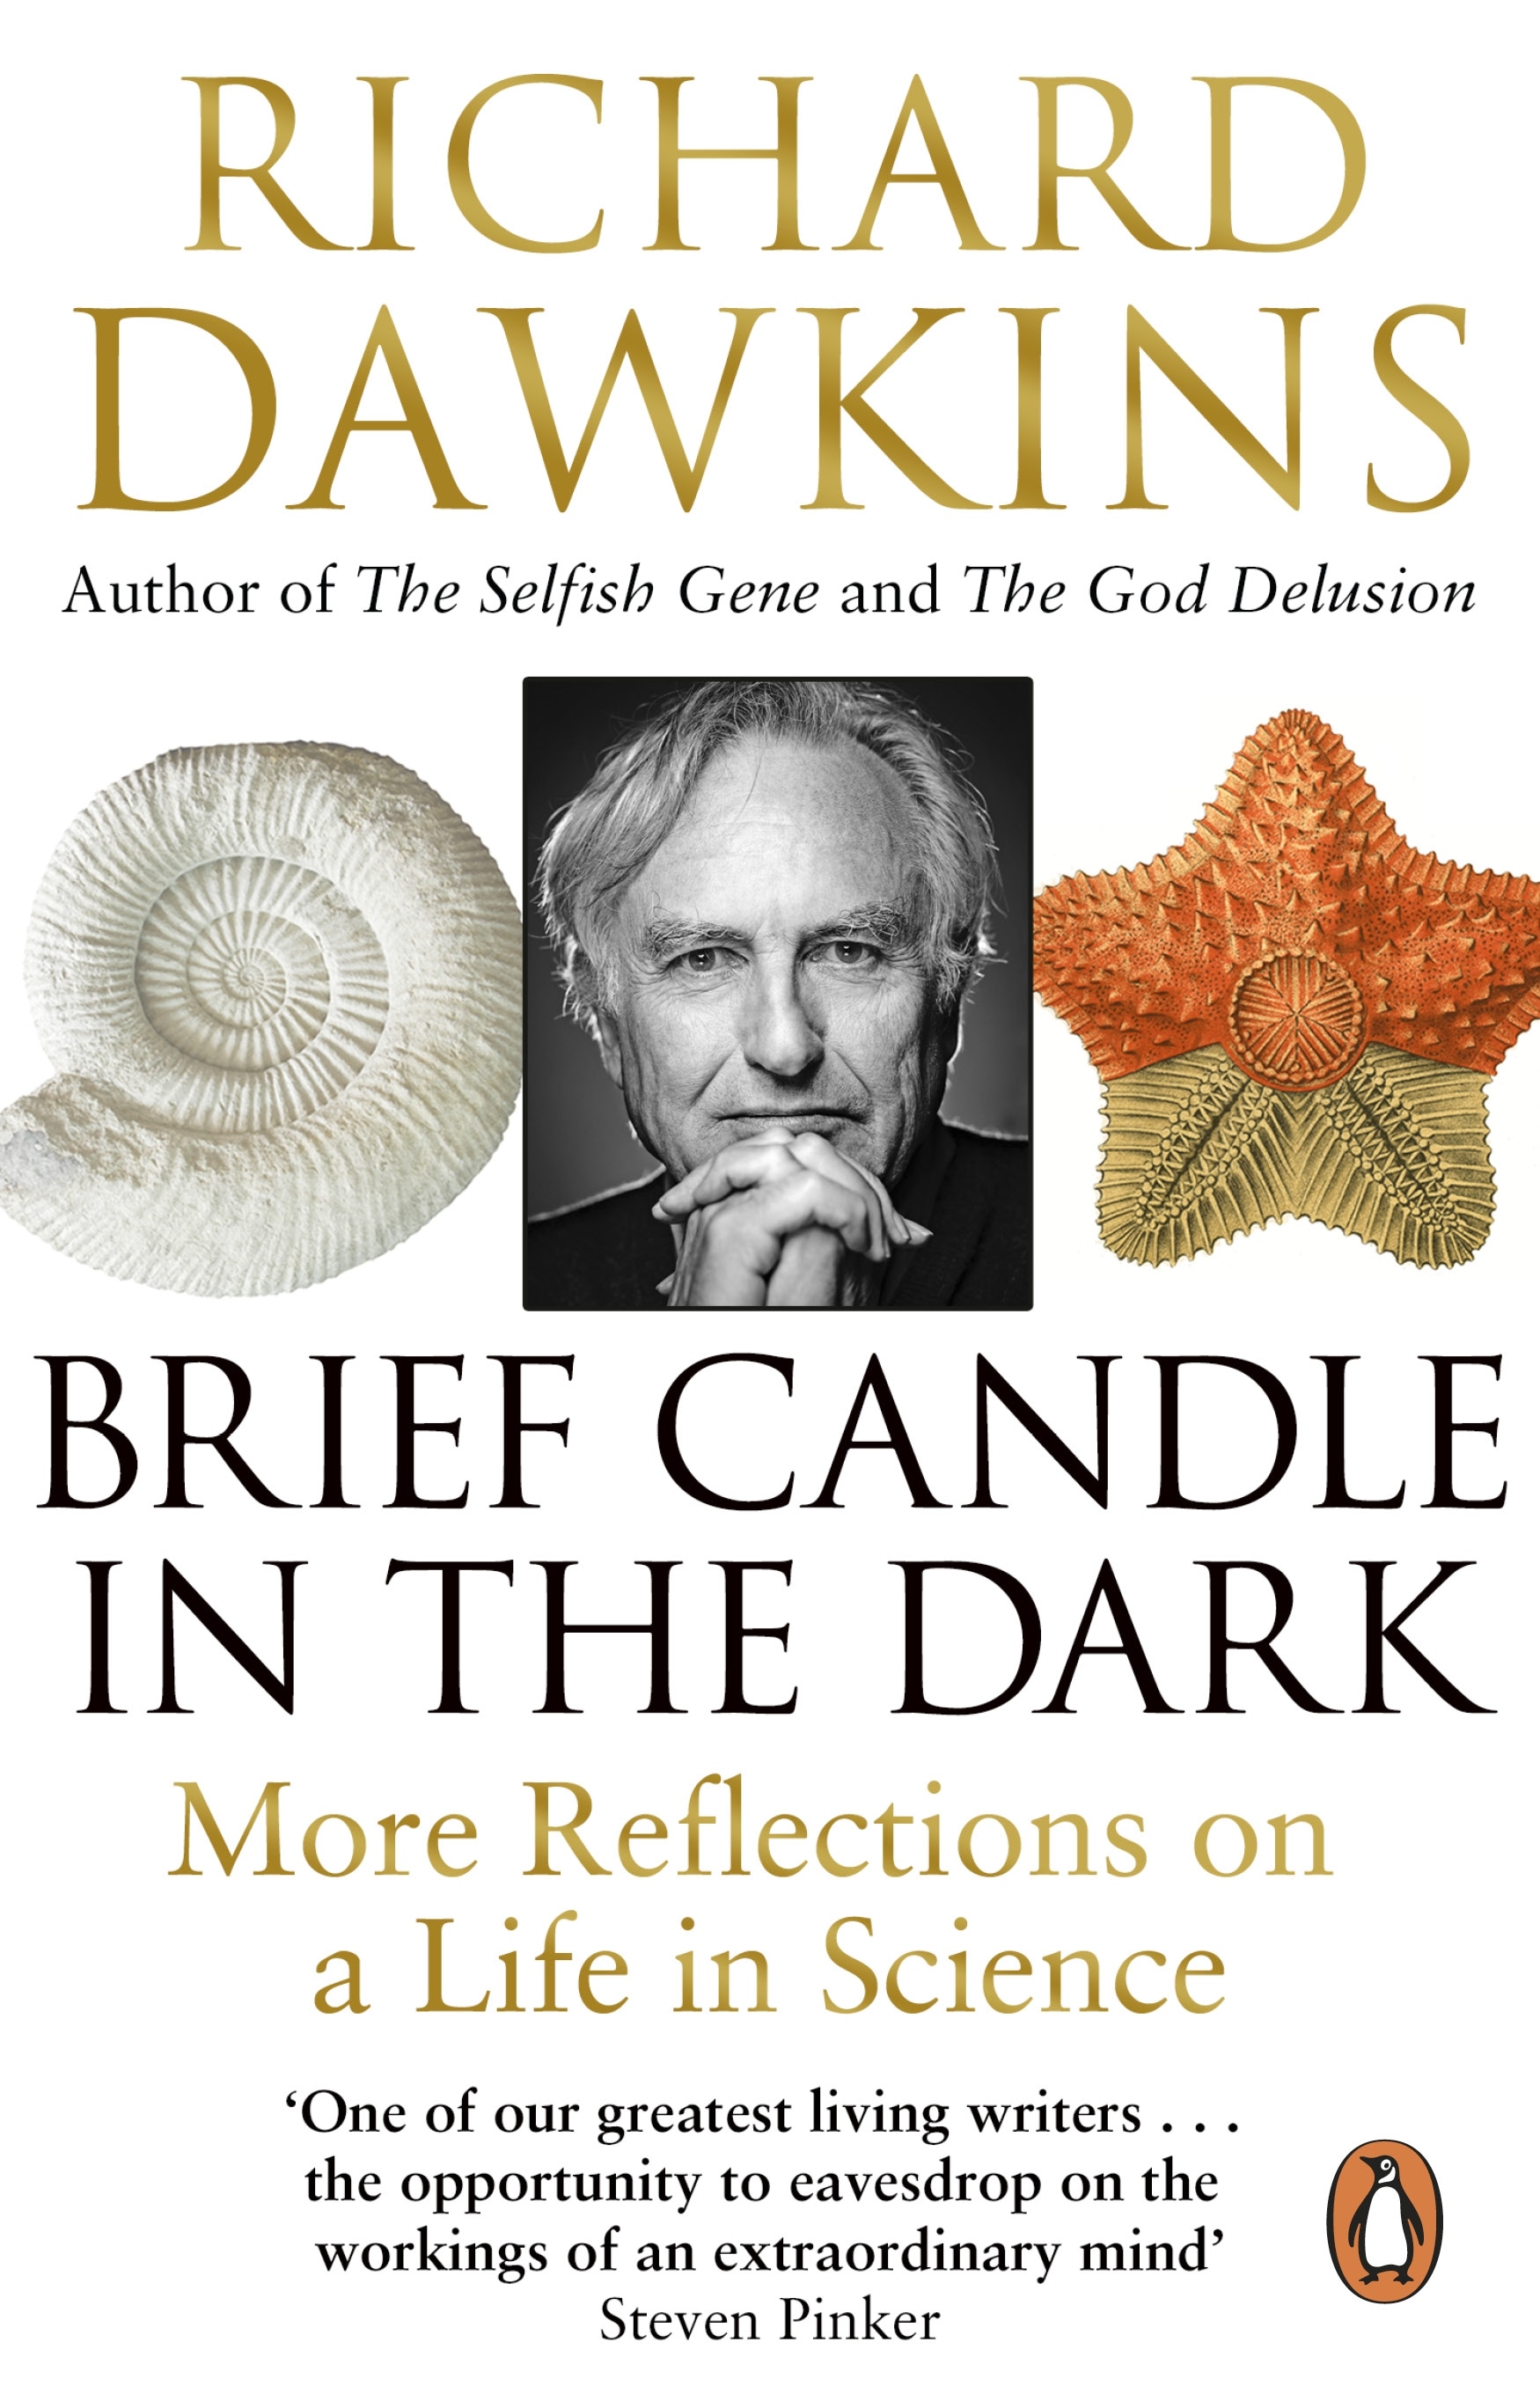 Book “Brief Candle in the Dark” by Richard Dawkins — April 7, 2016